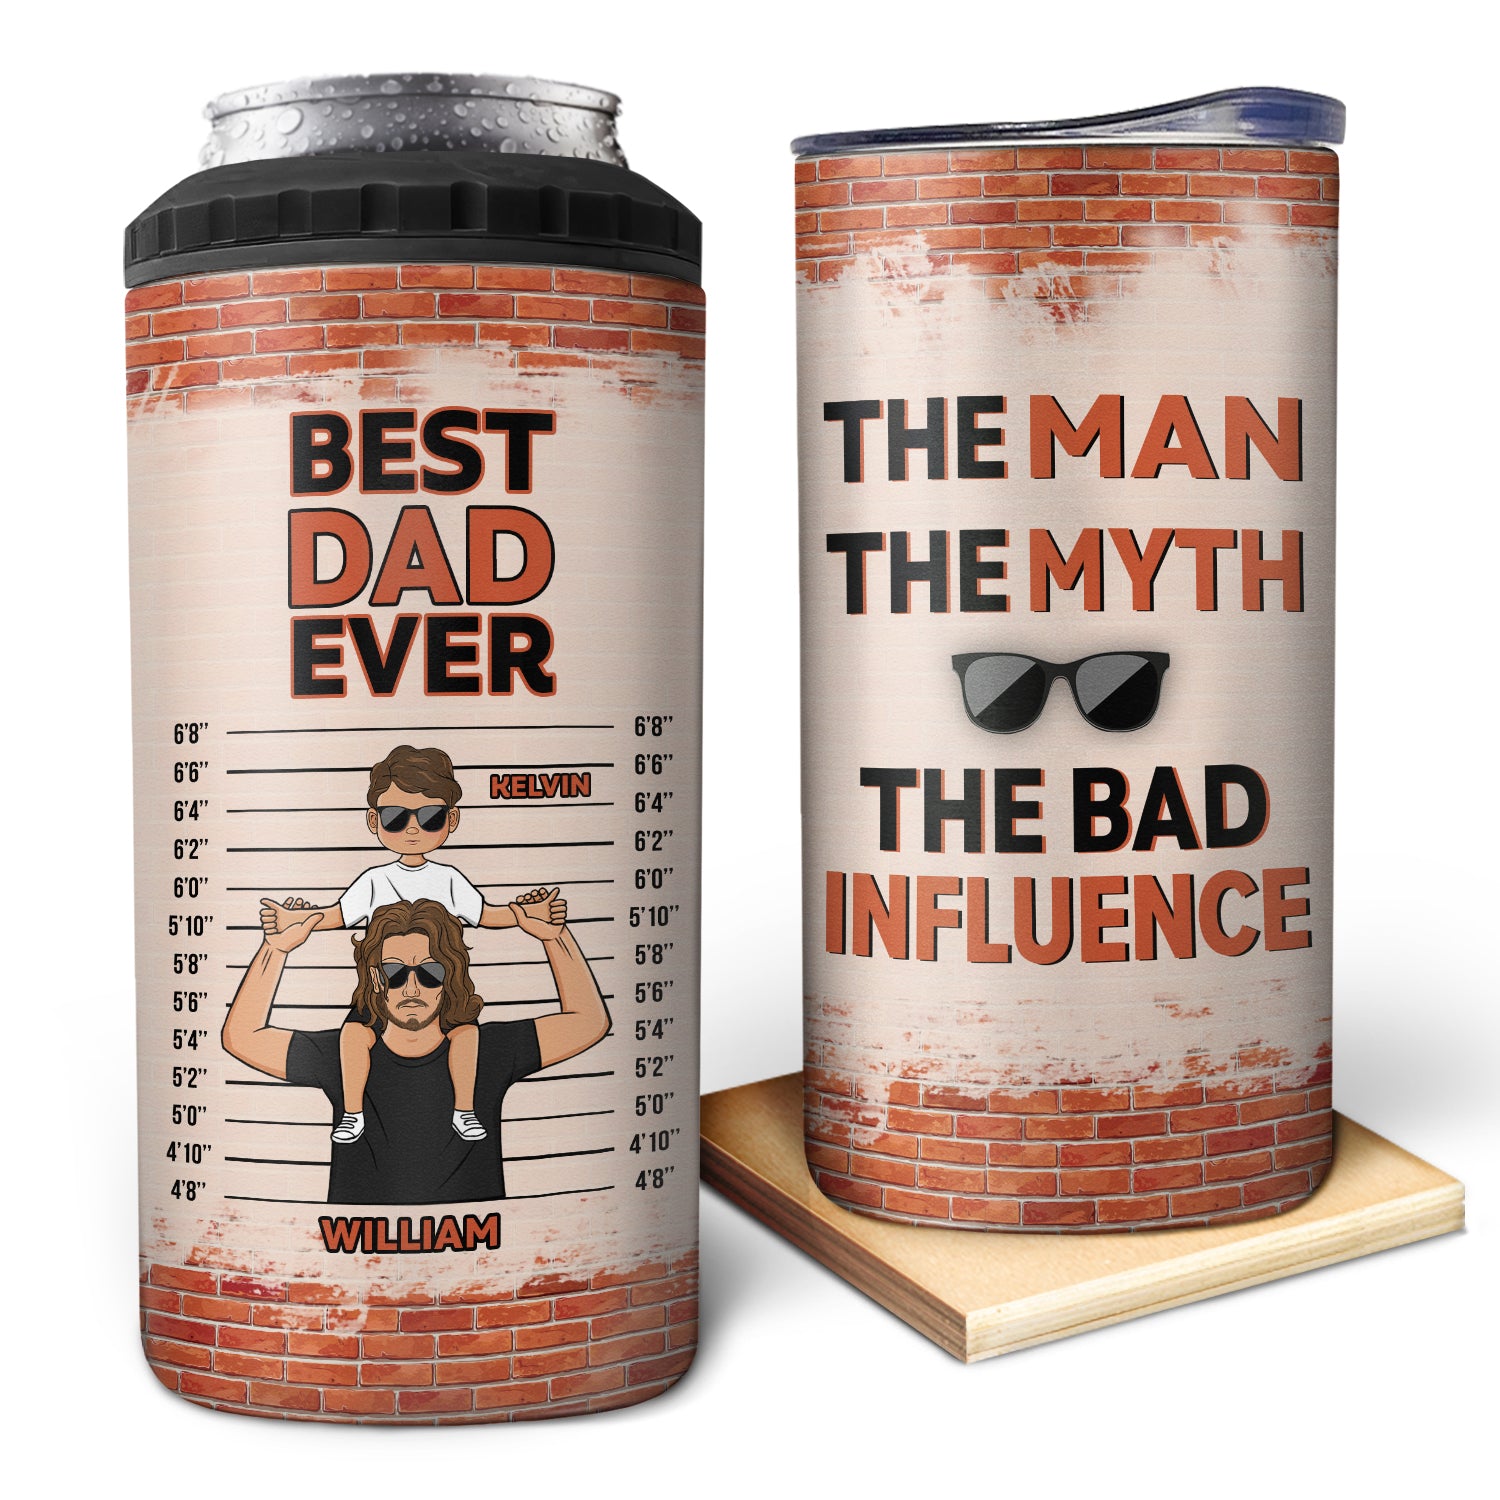 The Man, The Myth, The Bad Influence - Gift For Father, Dad - Personalized 4 In 1 Can Cooler Tumbler